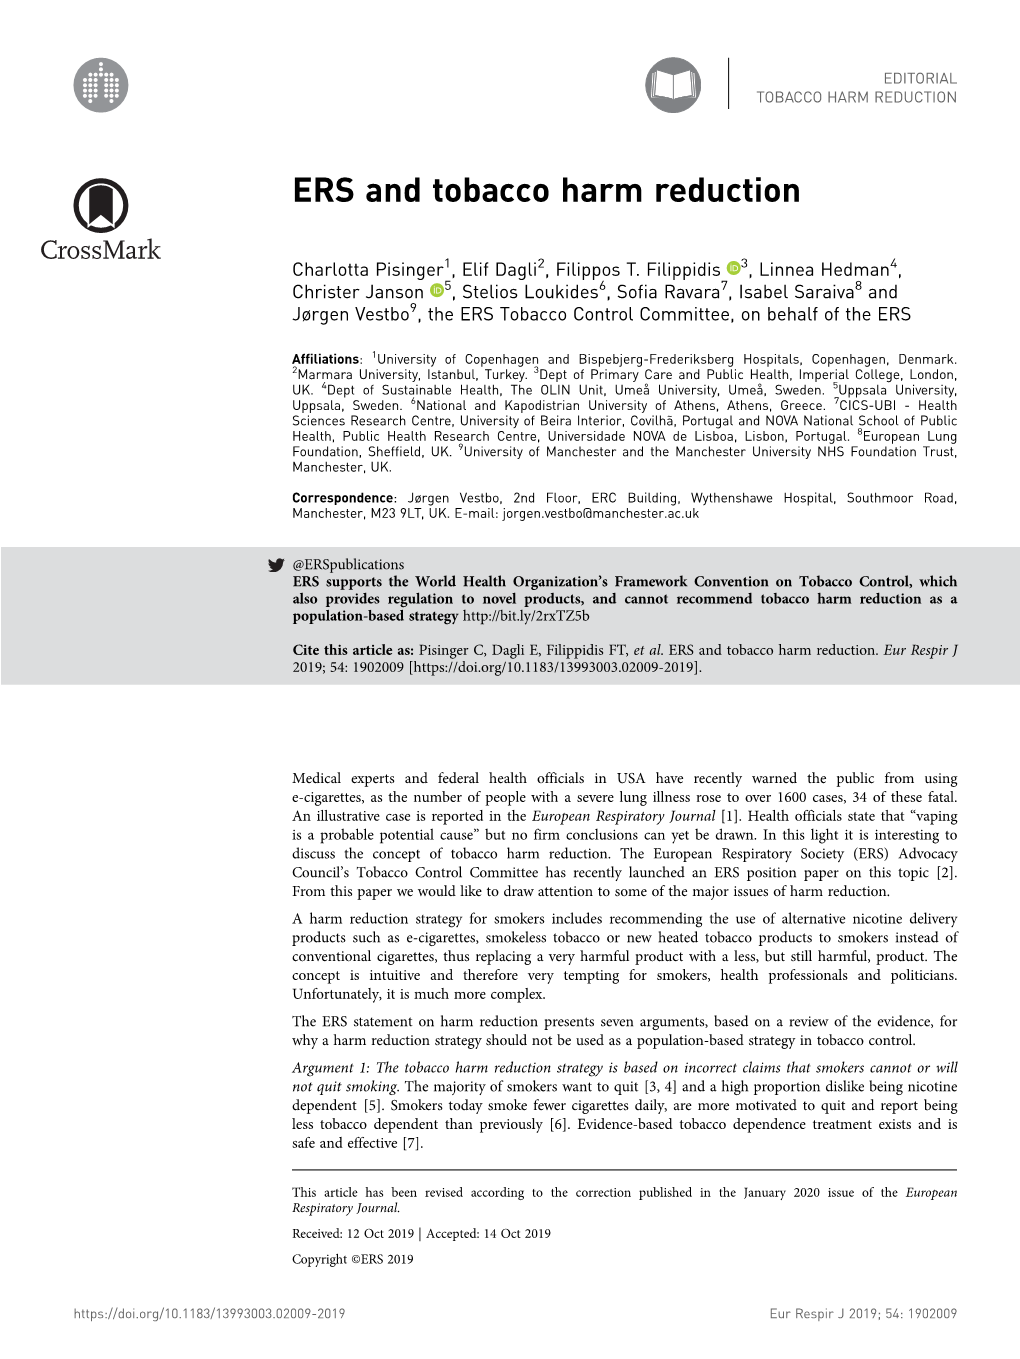 ERS and Tobacco Harm Reduction